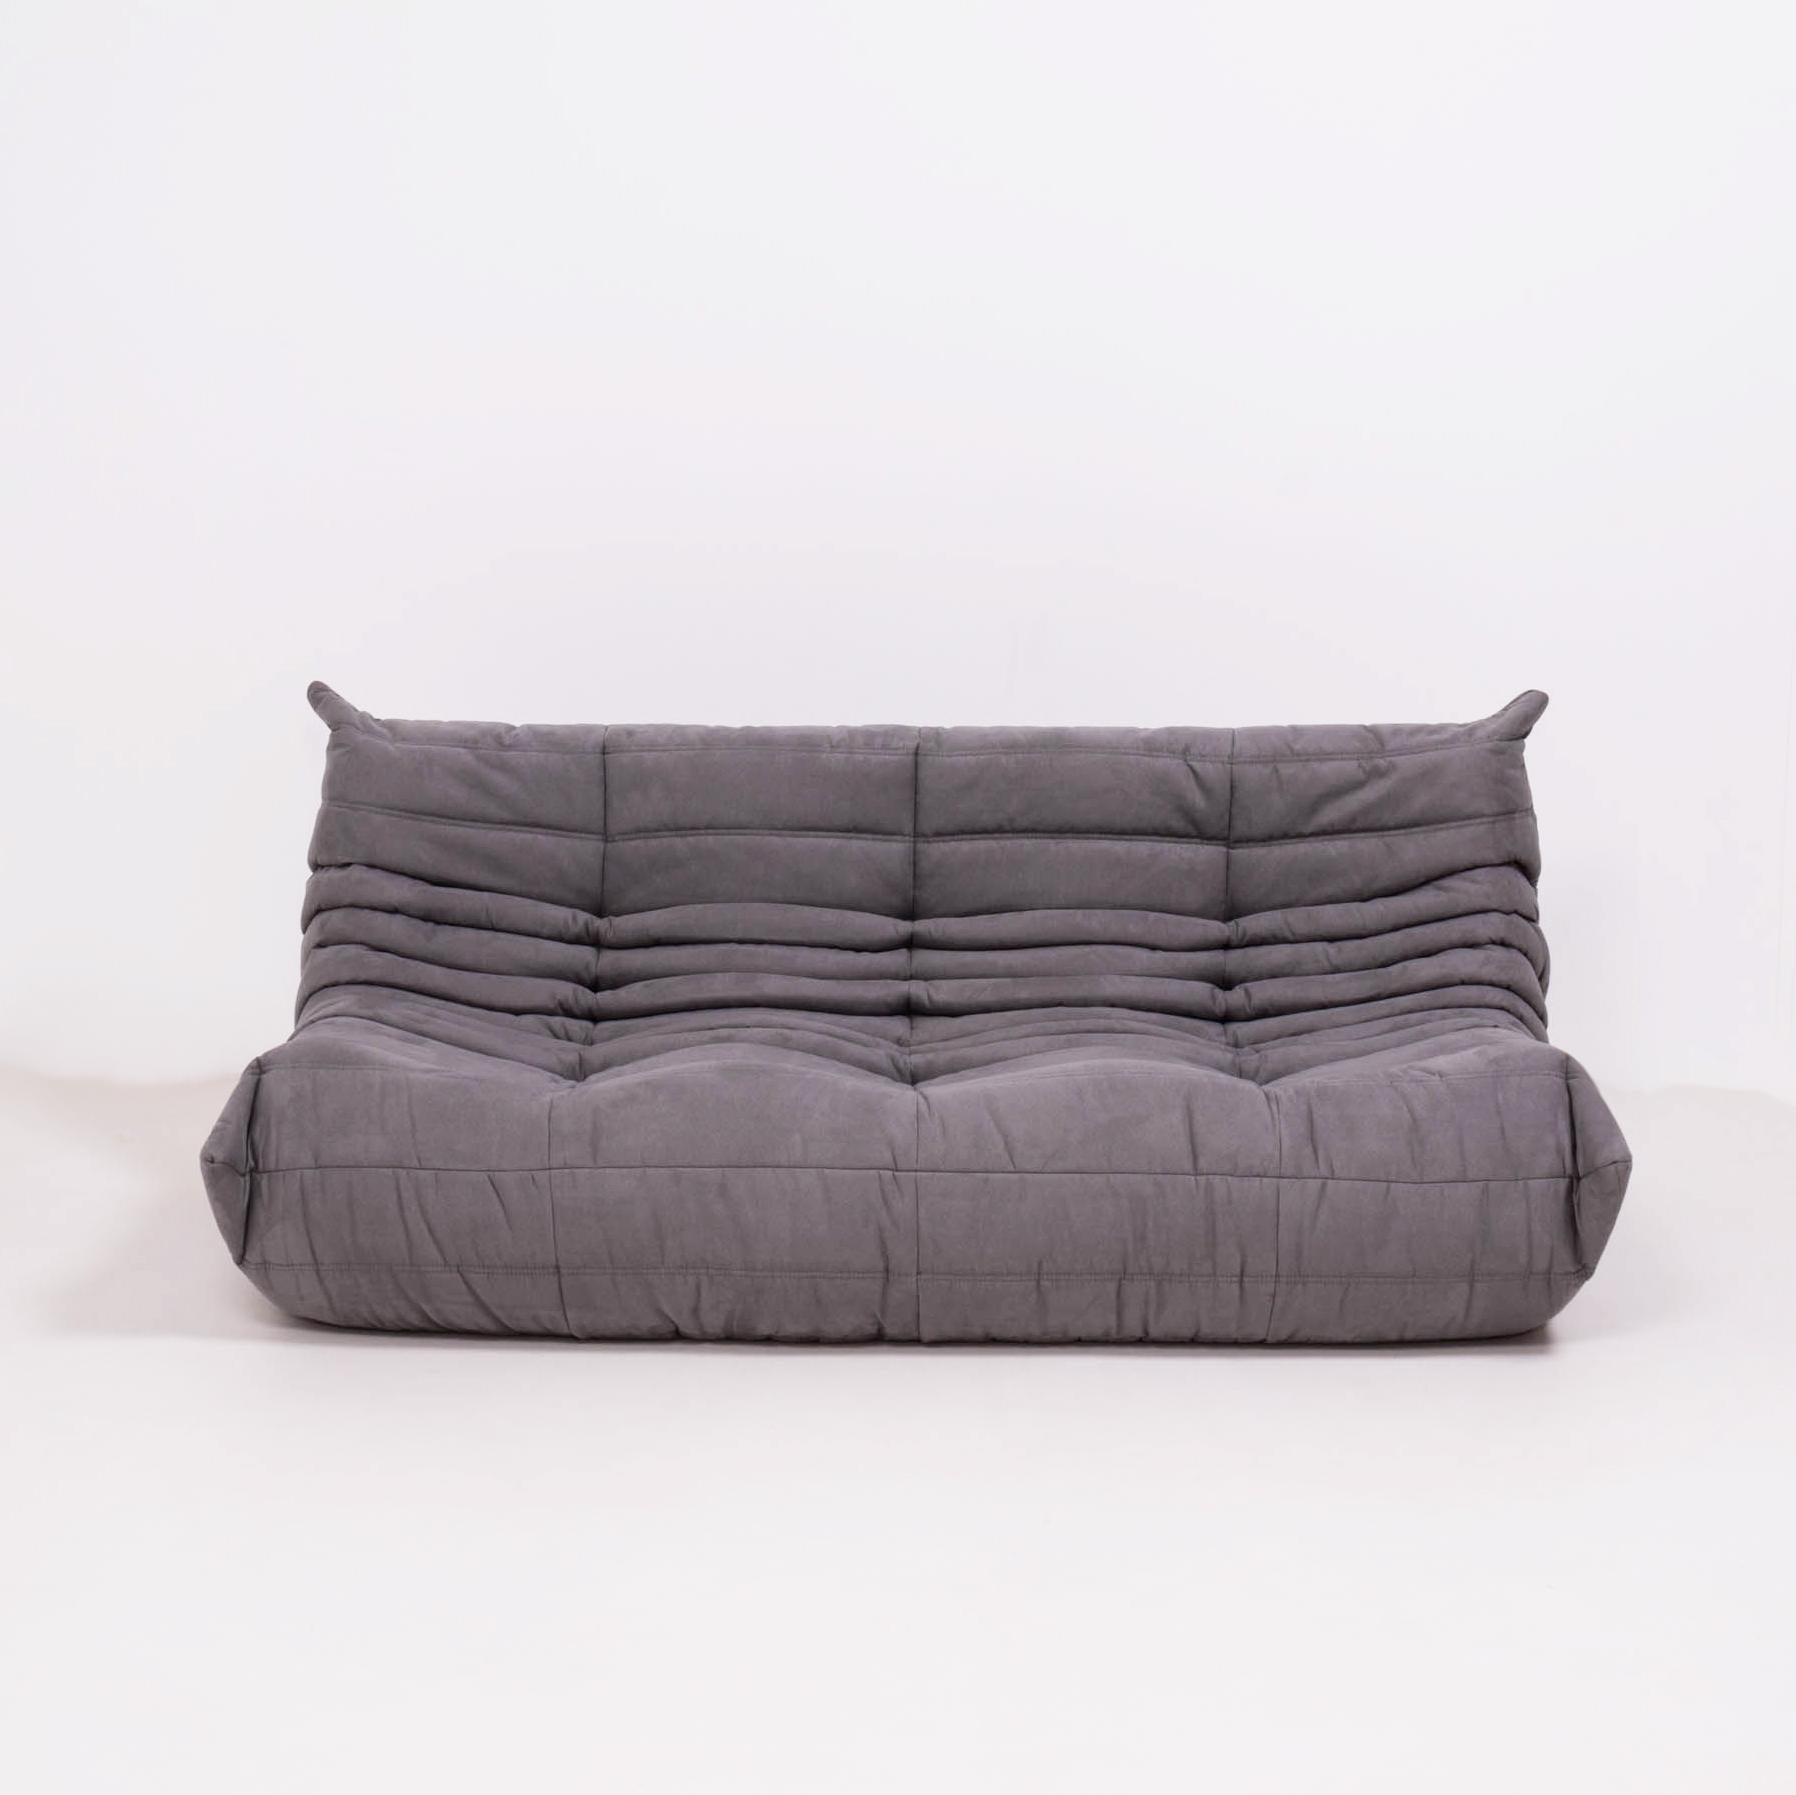 Late 20th Century Togo Grey Modular Sofa and Footstool by Michel Ducaroy for Ligne Roset, Set of 5 For Sale